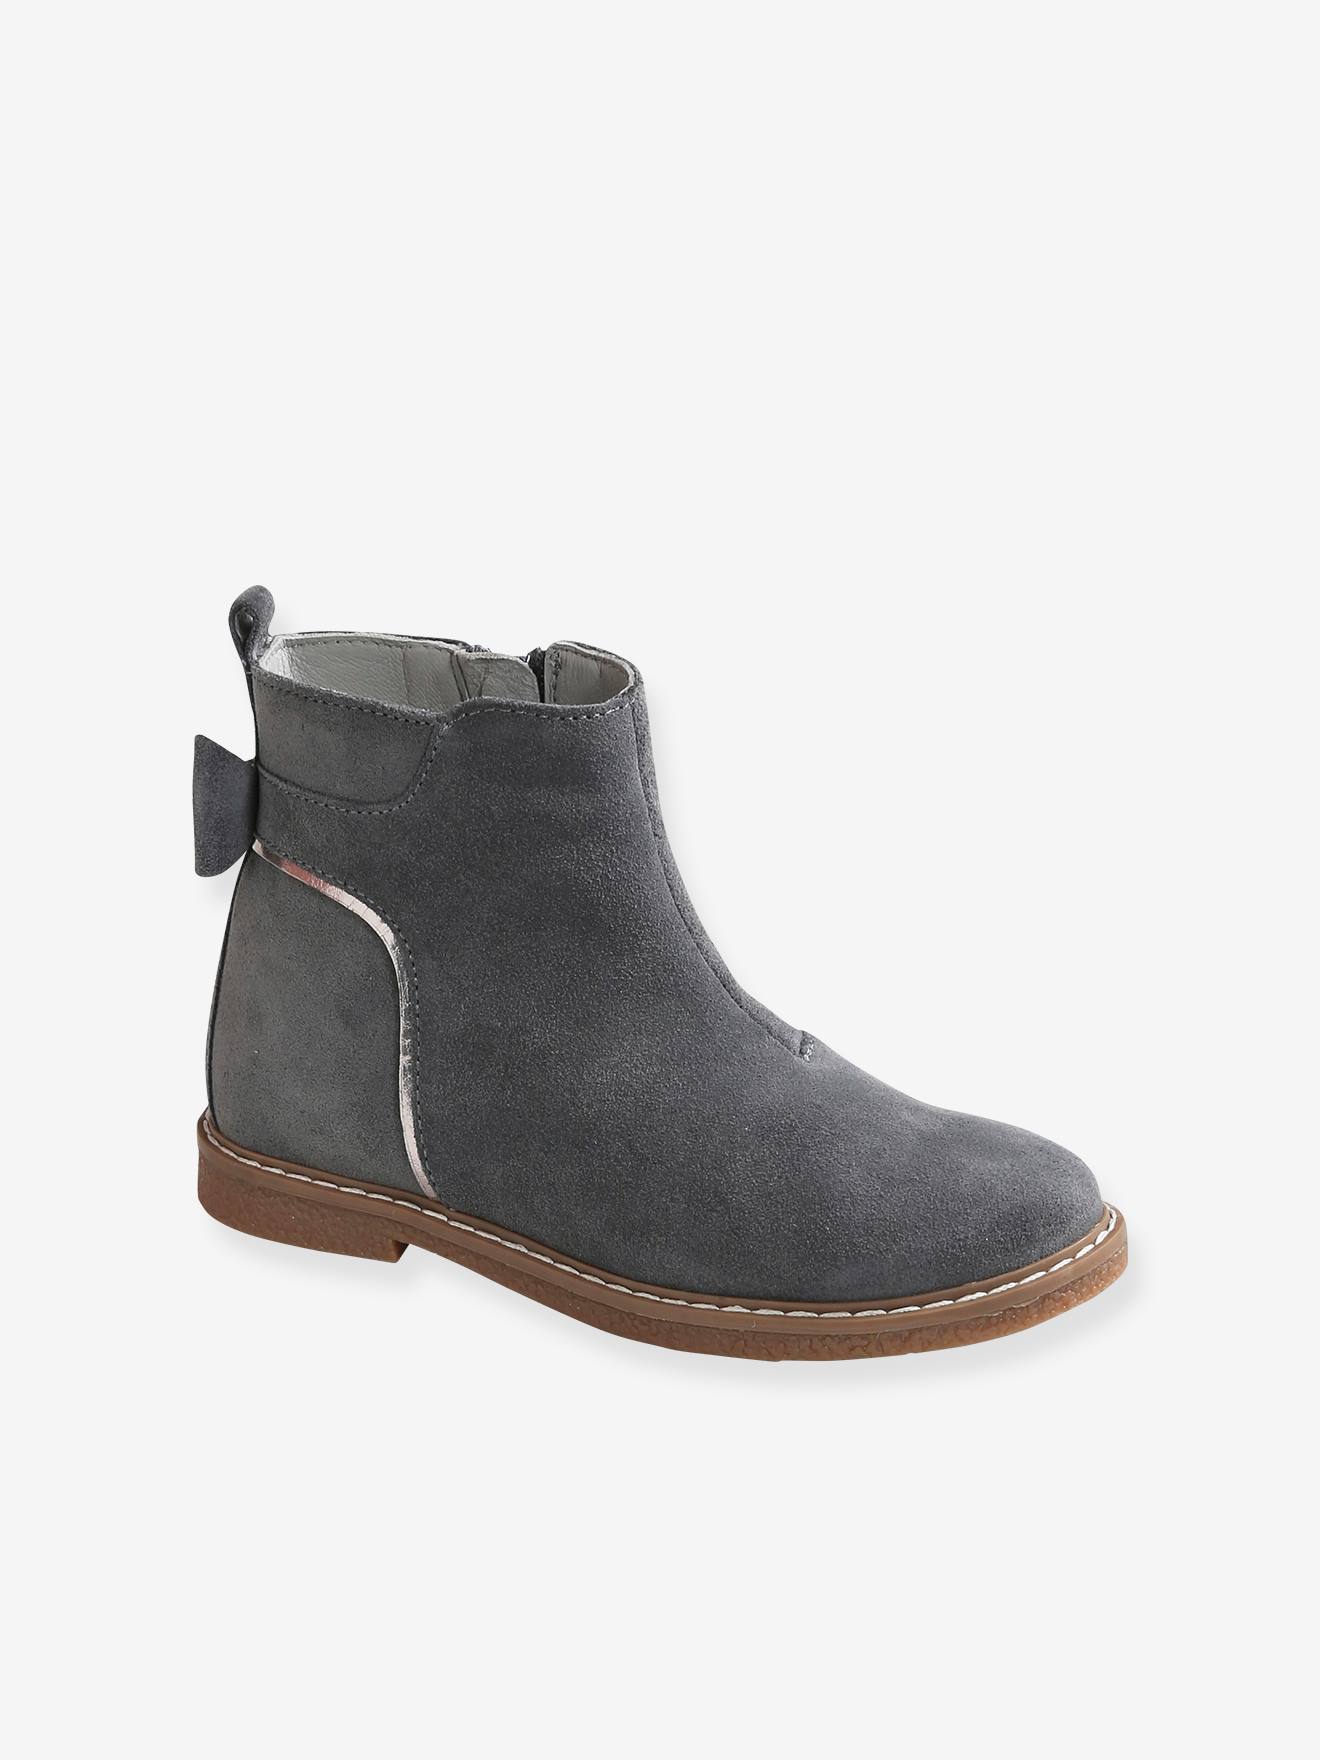 Leather Boots for Girls - grey medium 